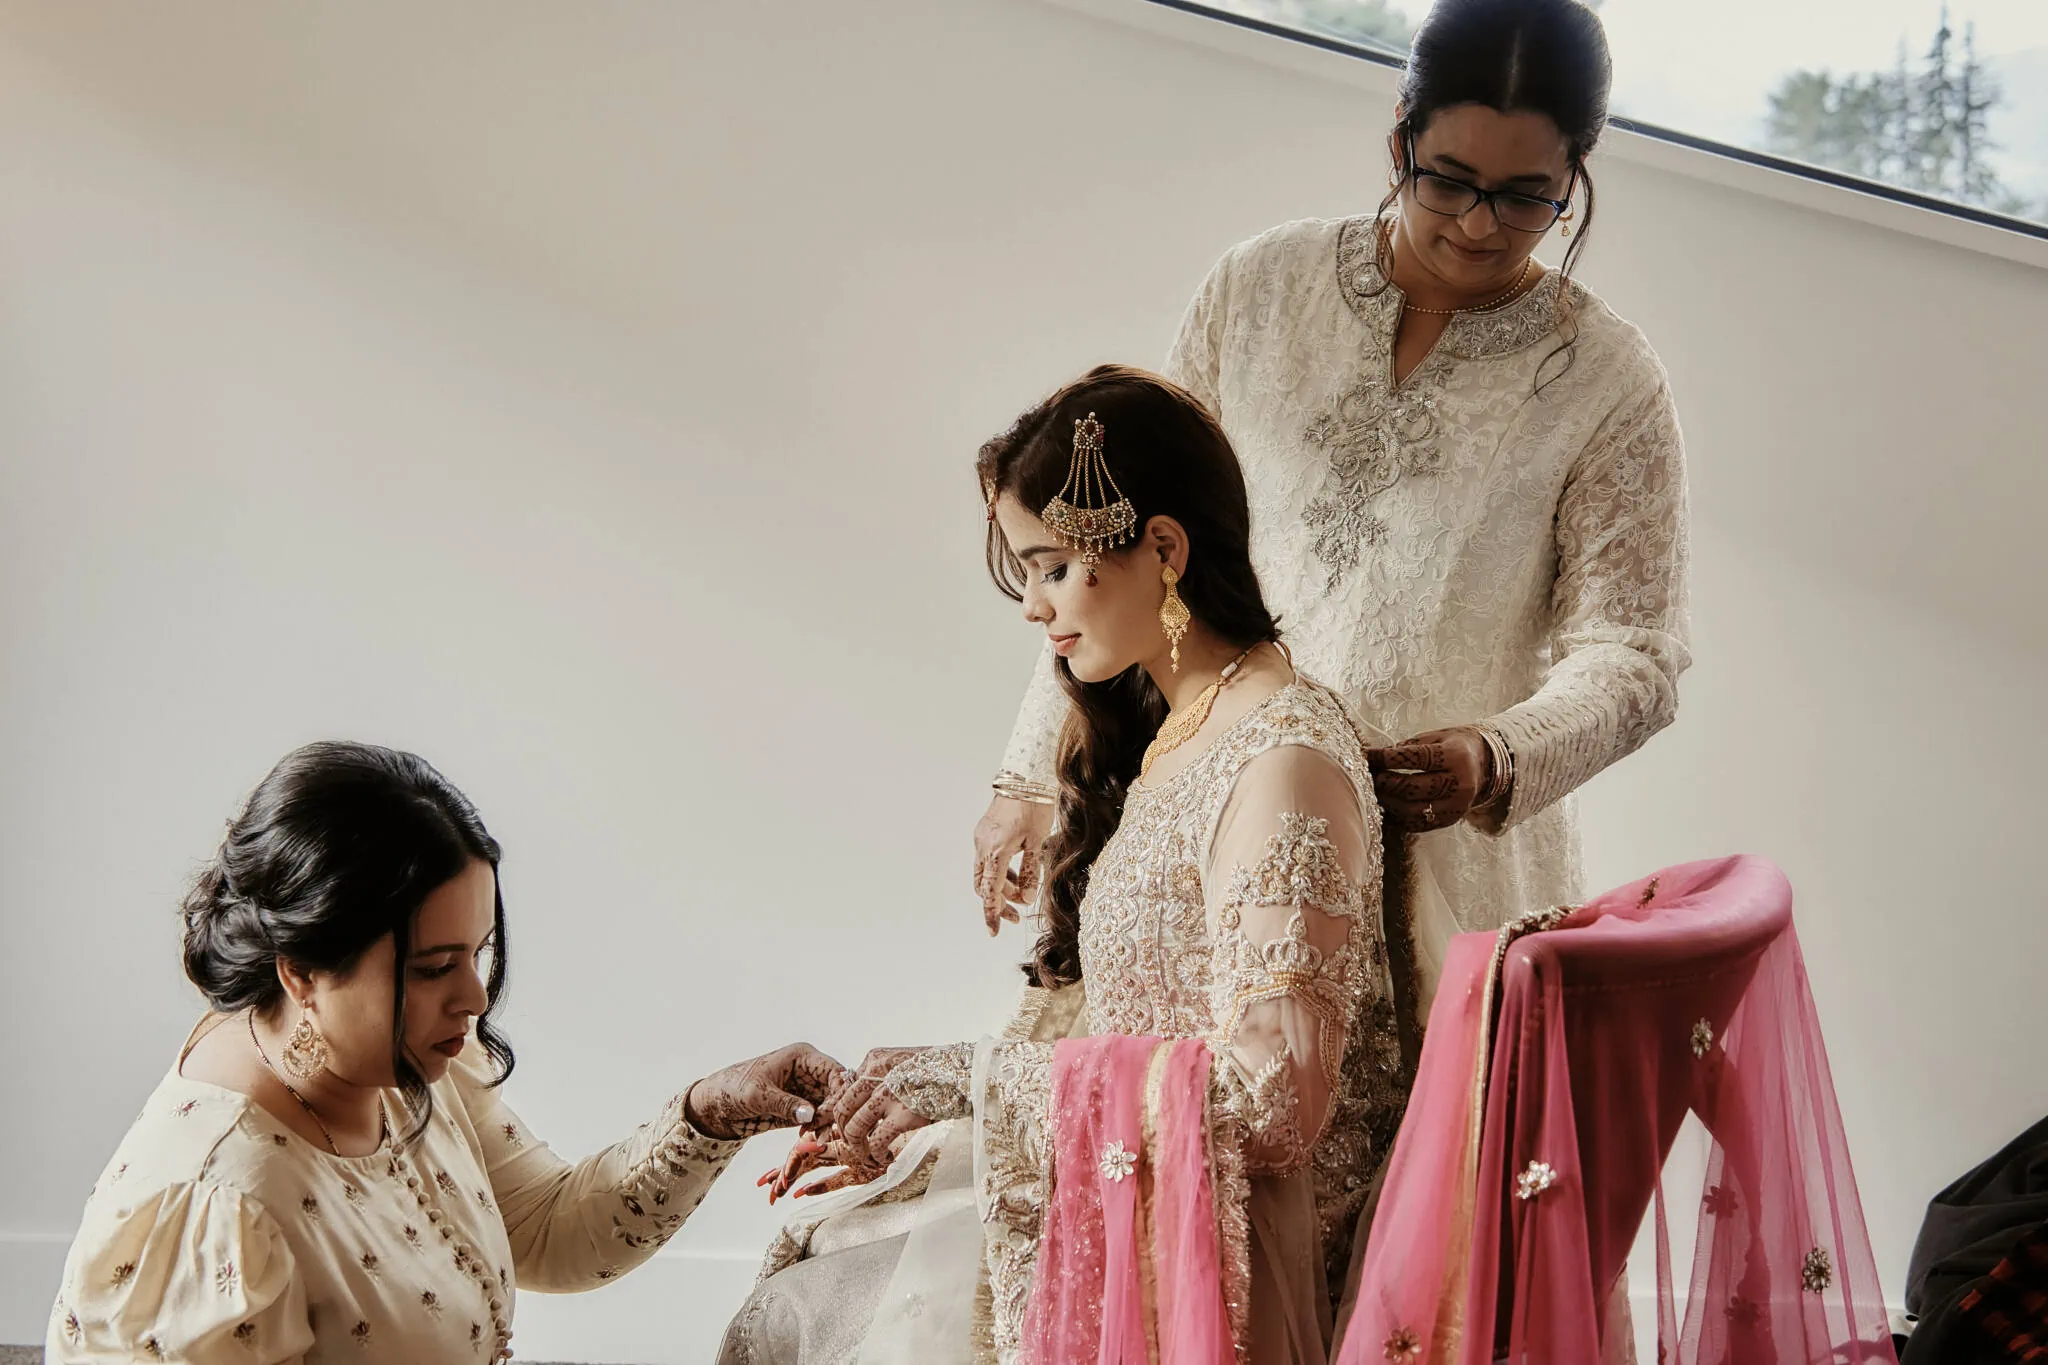 Queenstown New Zealand Elopement Wedding Photographer - A Queenstown Islamic wedding where Yumn is preparing for her special day.